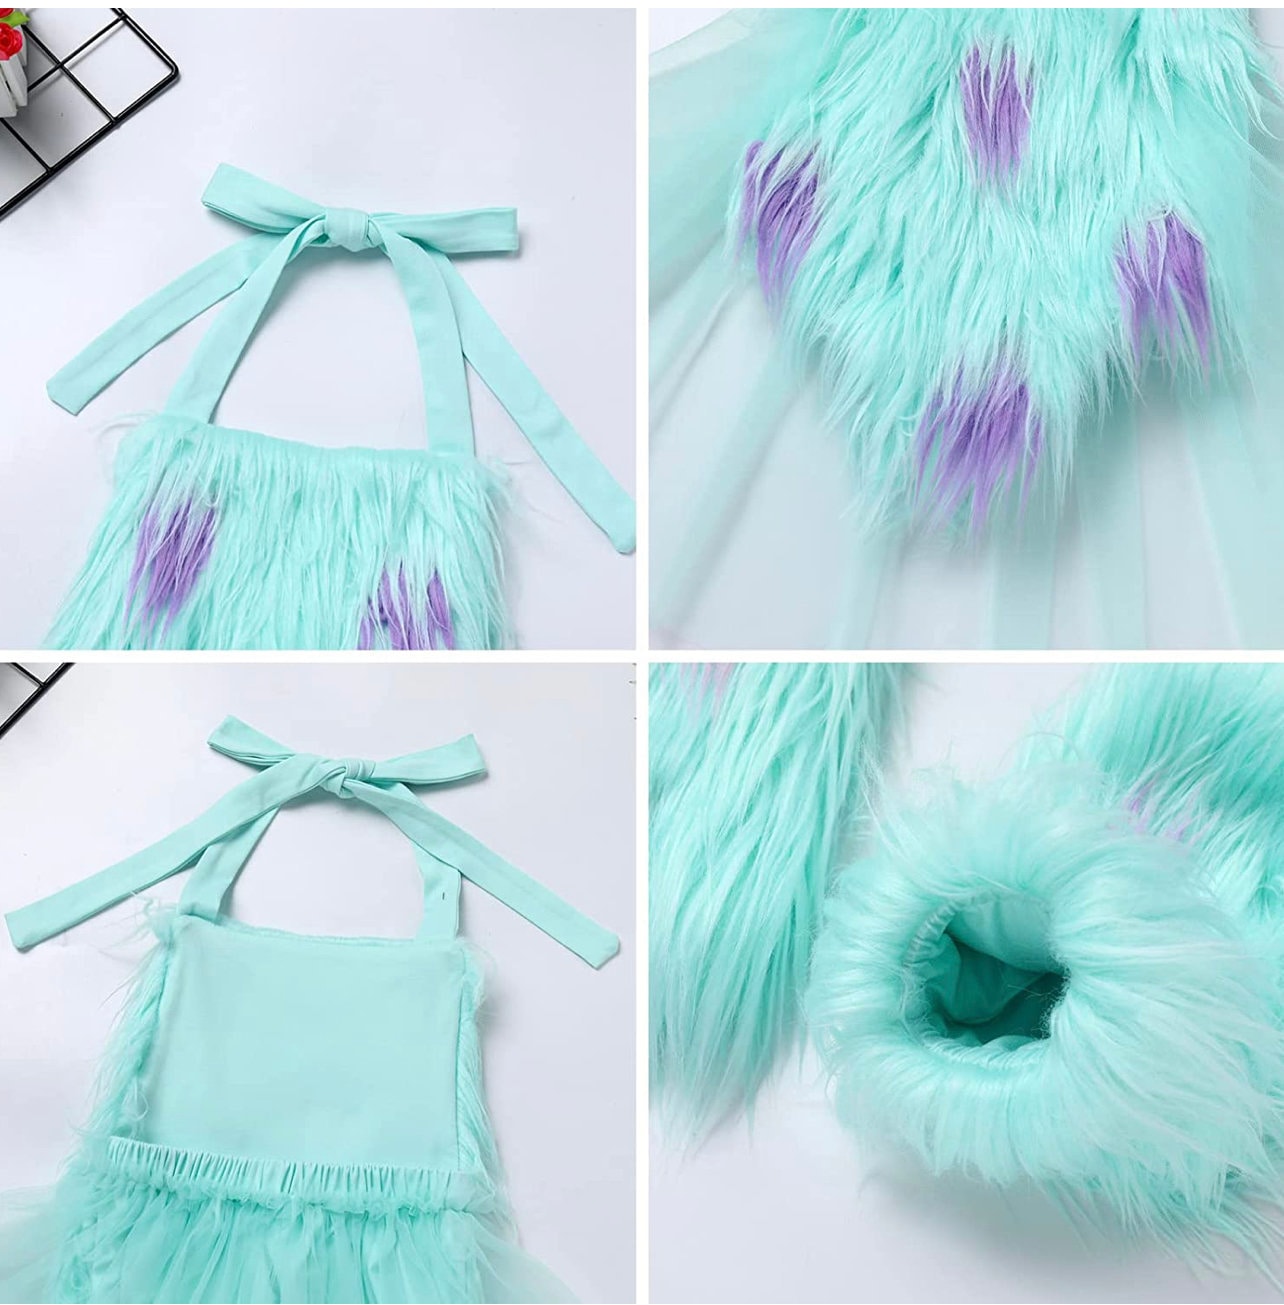 Monsters Inc Sully inspired Baby Costume with Leg Warmers